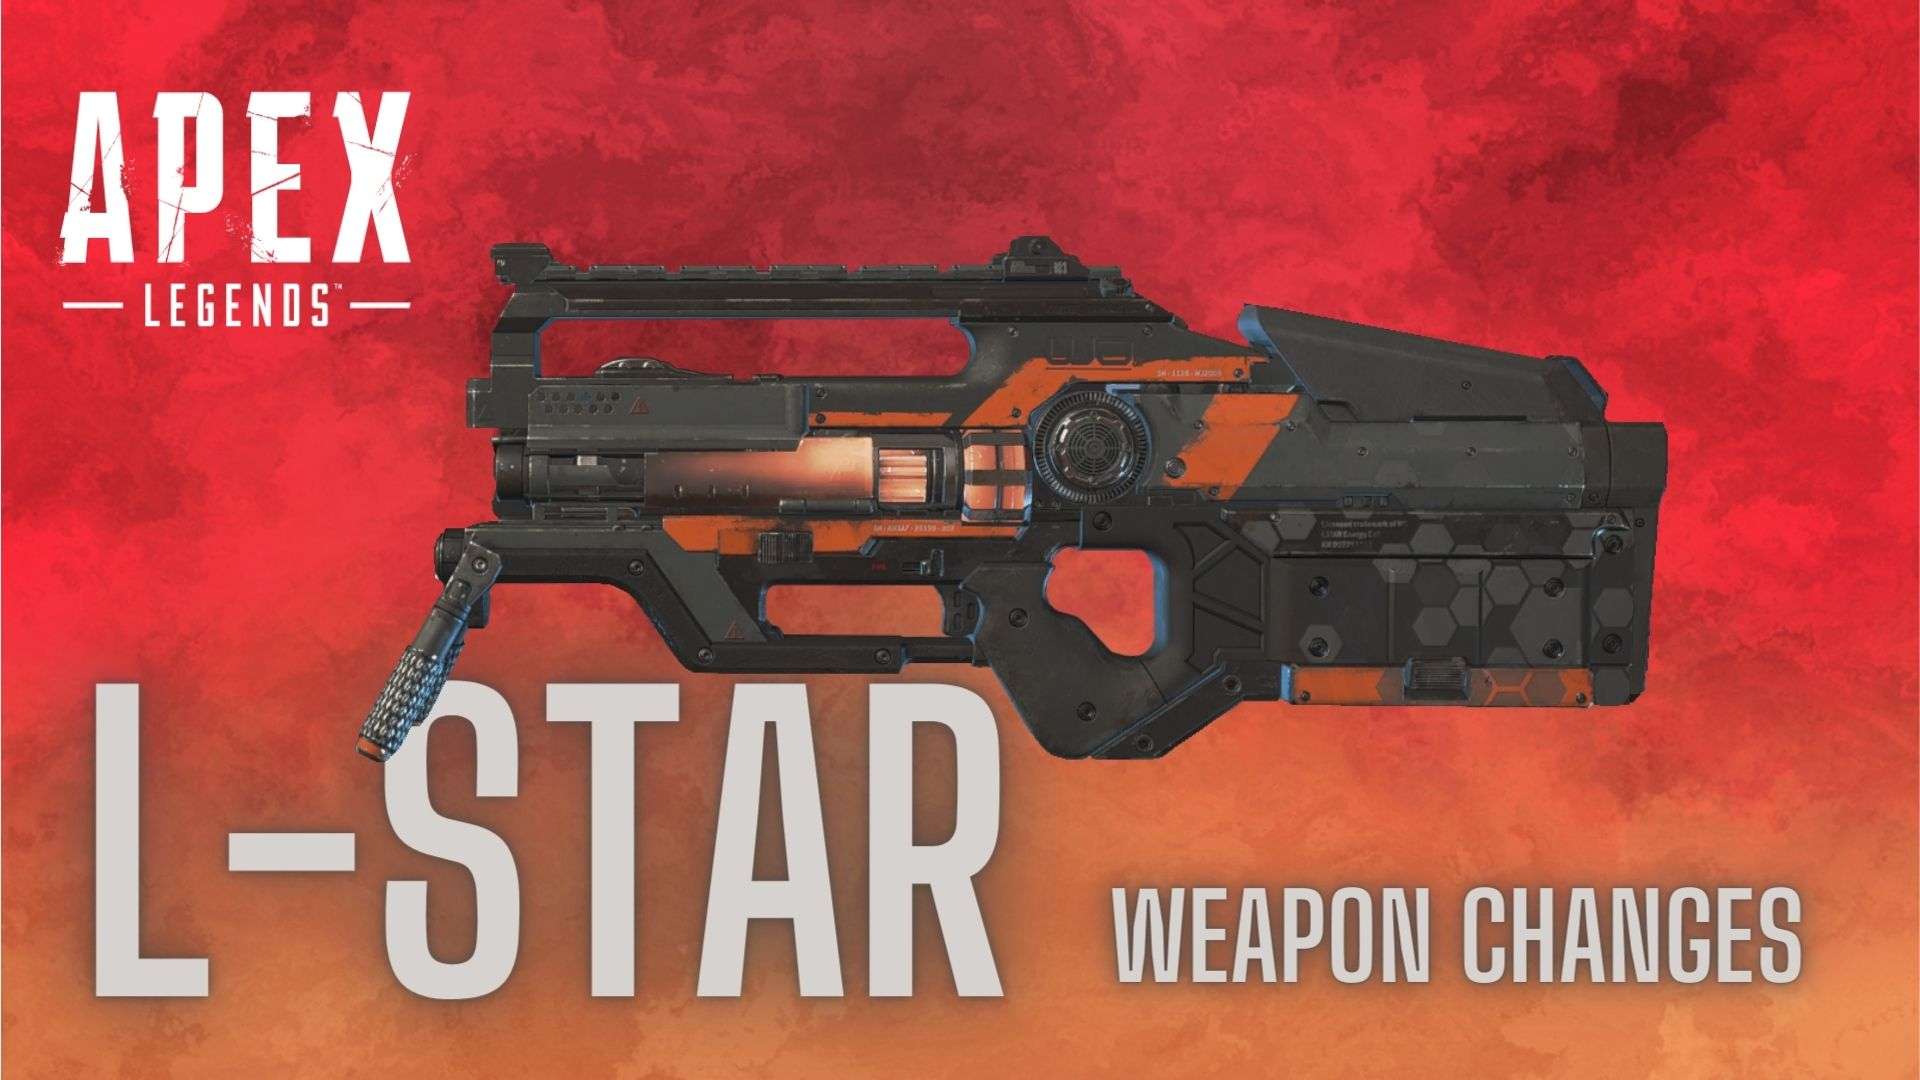 L-STAR weapon changes